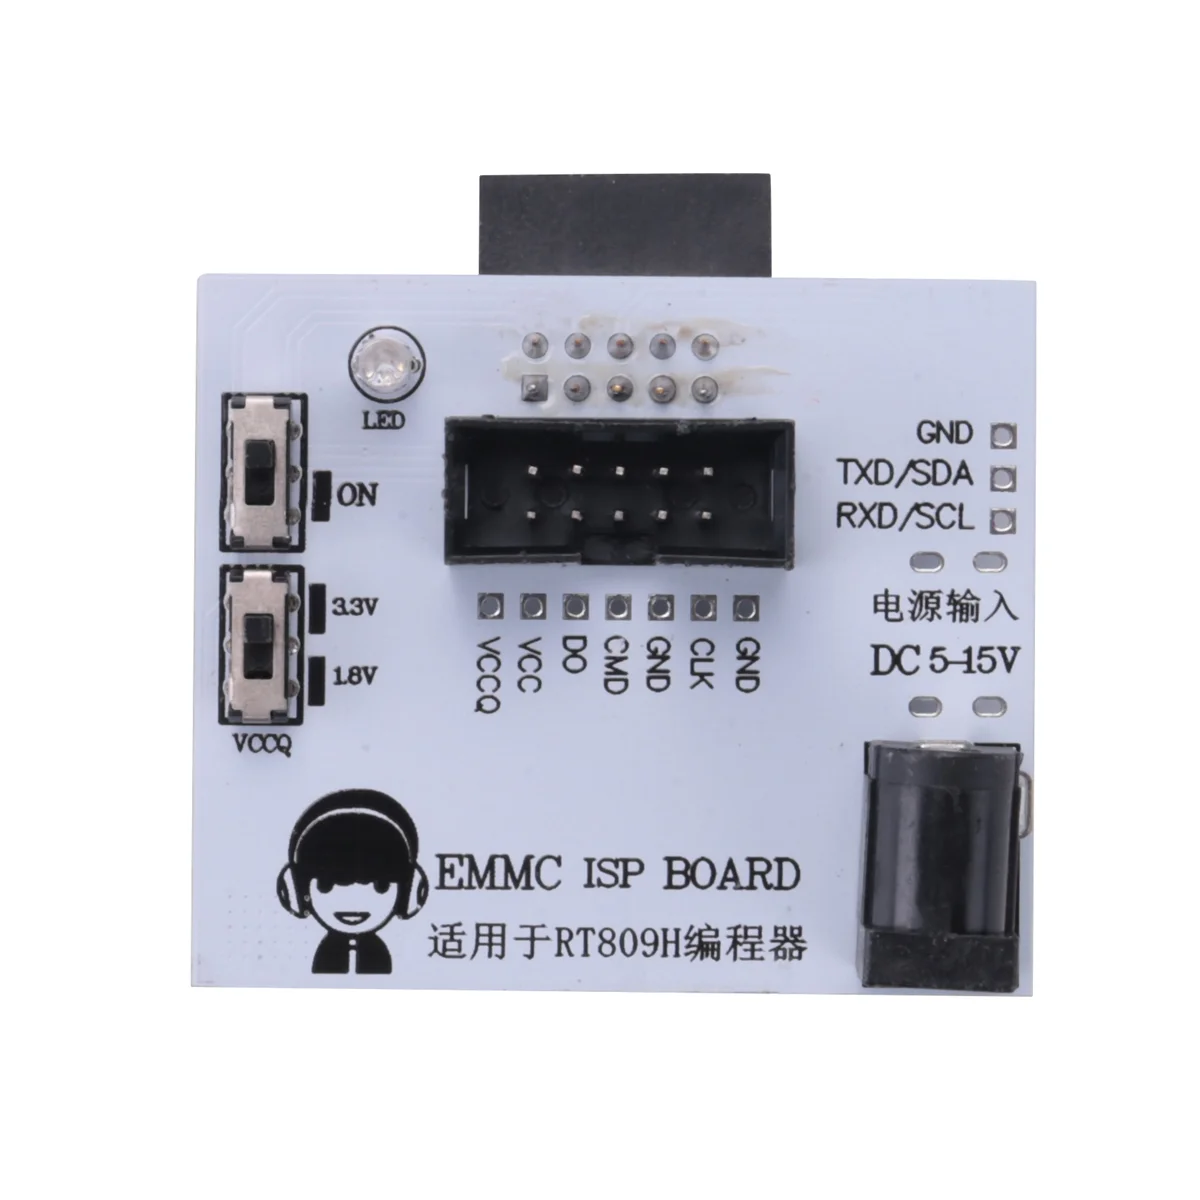 

EMMC ISP Board EMMC for RT809H Programmer EMMC Adapter Test Clip Fast Writing Reading Speed Calculator Chips